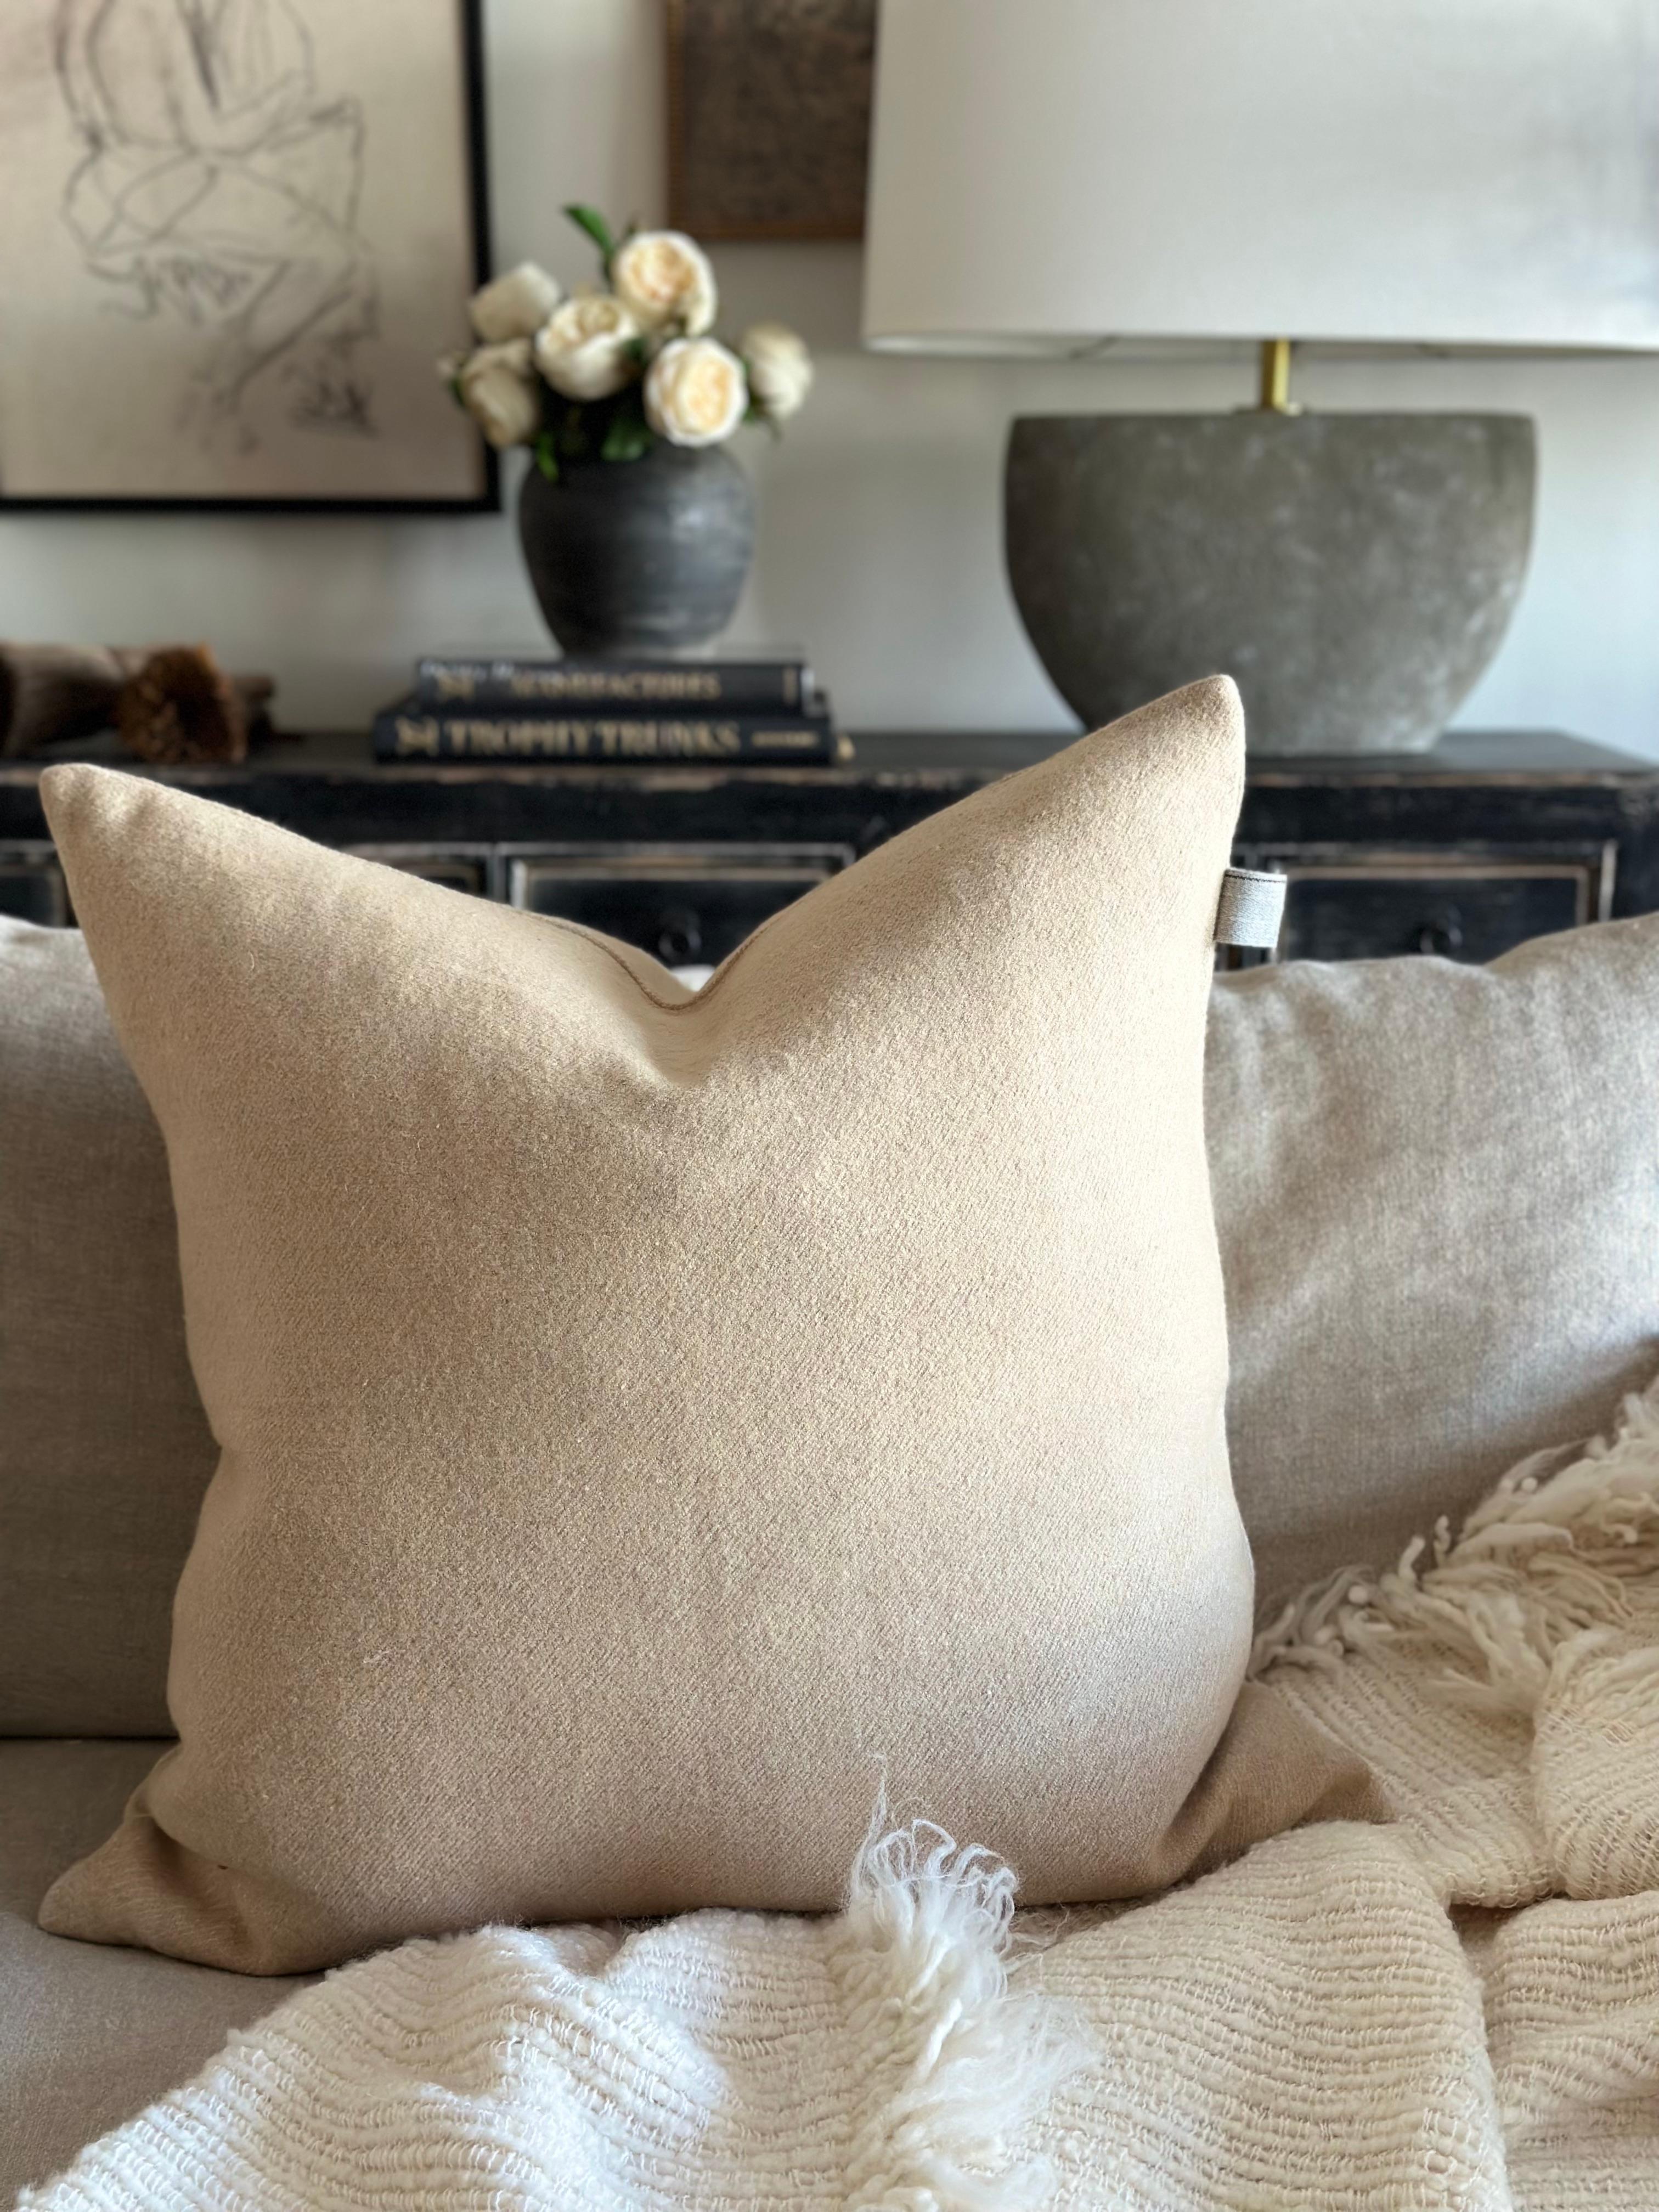 The combination of linen and wool makes for an extra soft and warm fabric. The pillow covers are finished with a zipper and a wool trim detail. Washed finish. 
Color: Nude / Camel 
70% linen – 30% wool
Includes down / feather insert
Size: 25